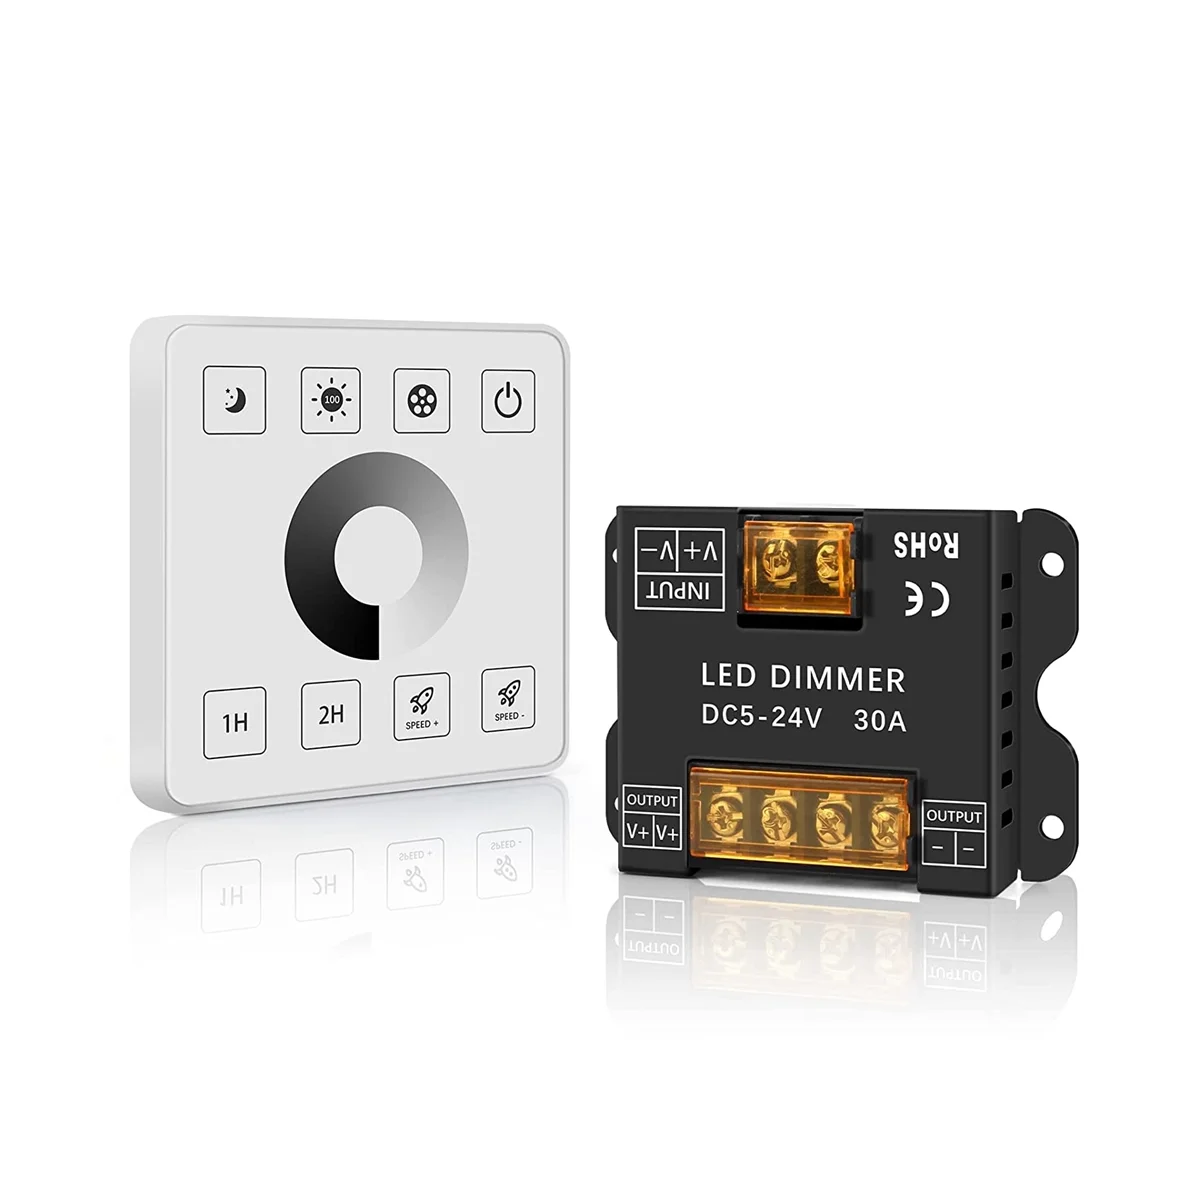 

RF Wireless Wall- Mounted Touch Panel Dimmer Control for DC5-24V 30A Single Color LED Strip Lighting